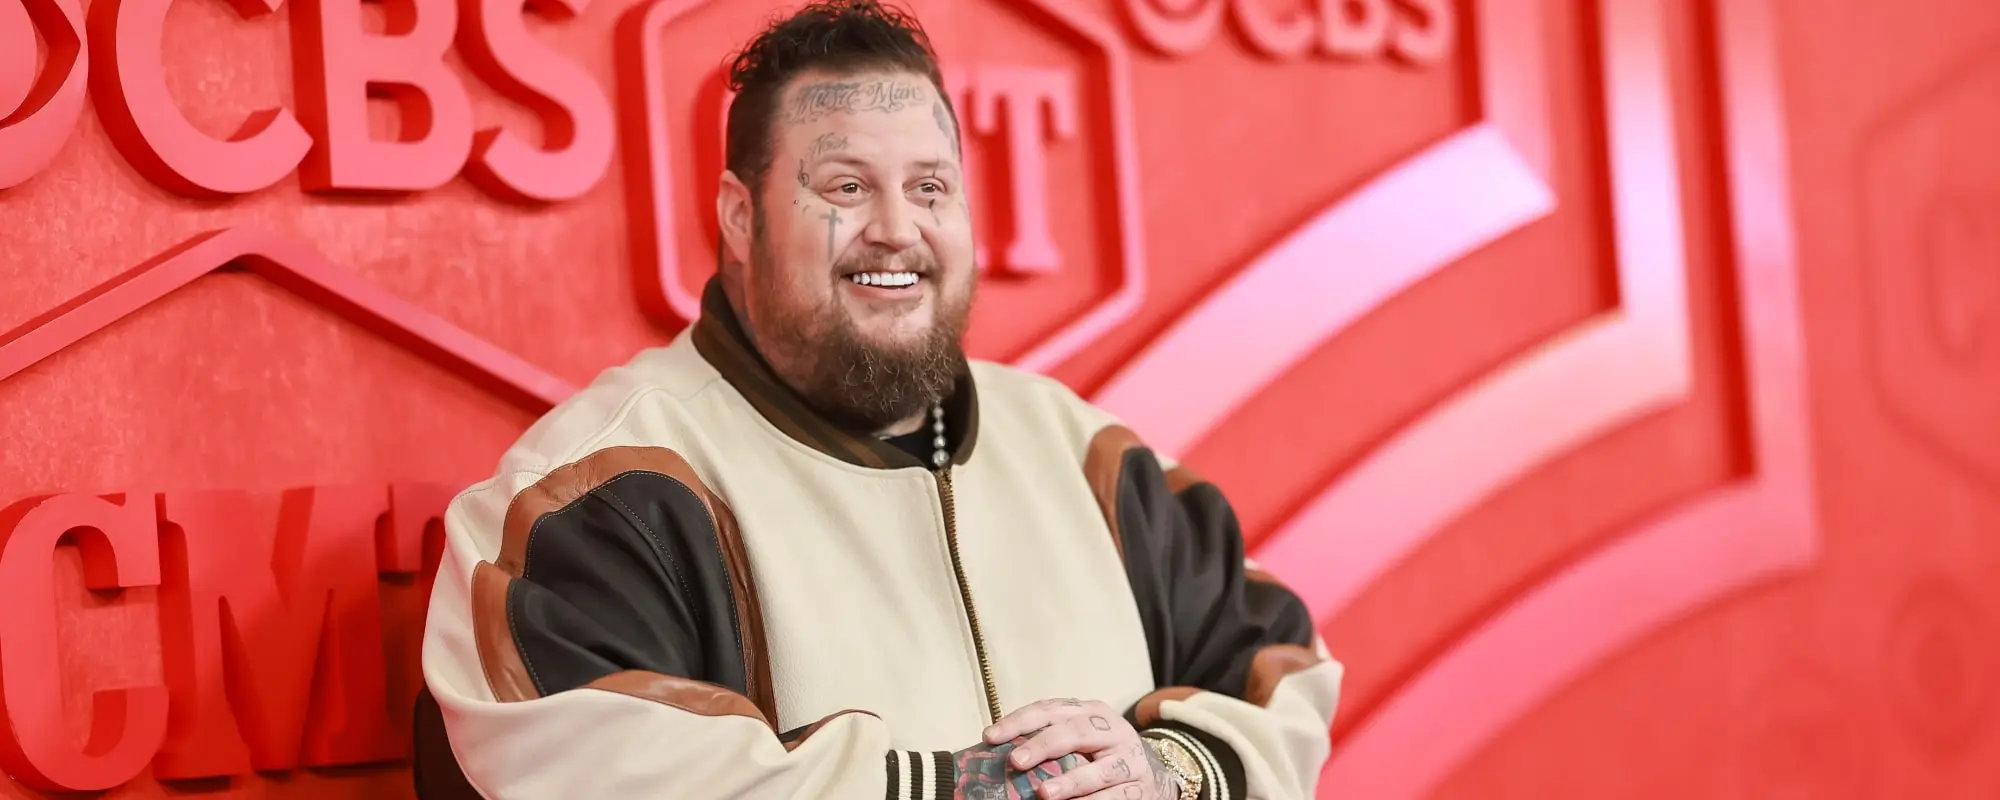 Jelly Roll Issues Sound Advice To Top 24 ‘American Idol’ Singer Who Is “Afraid of Overdoing It”